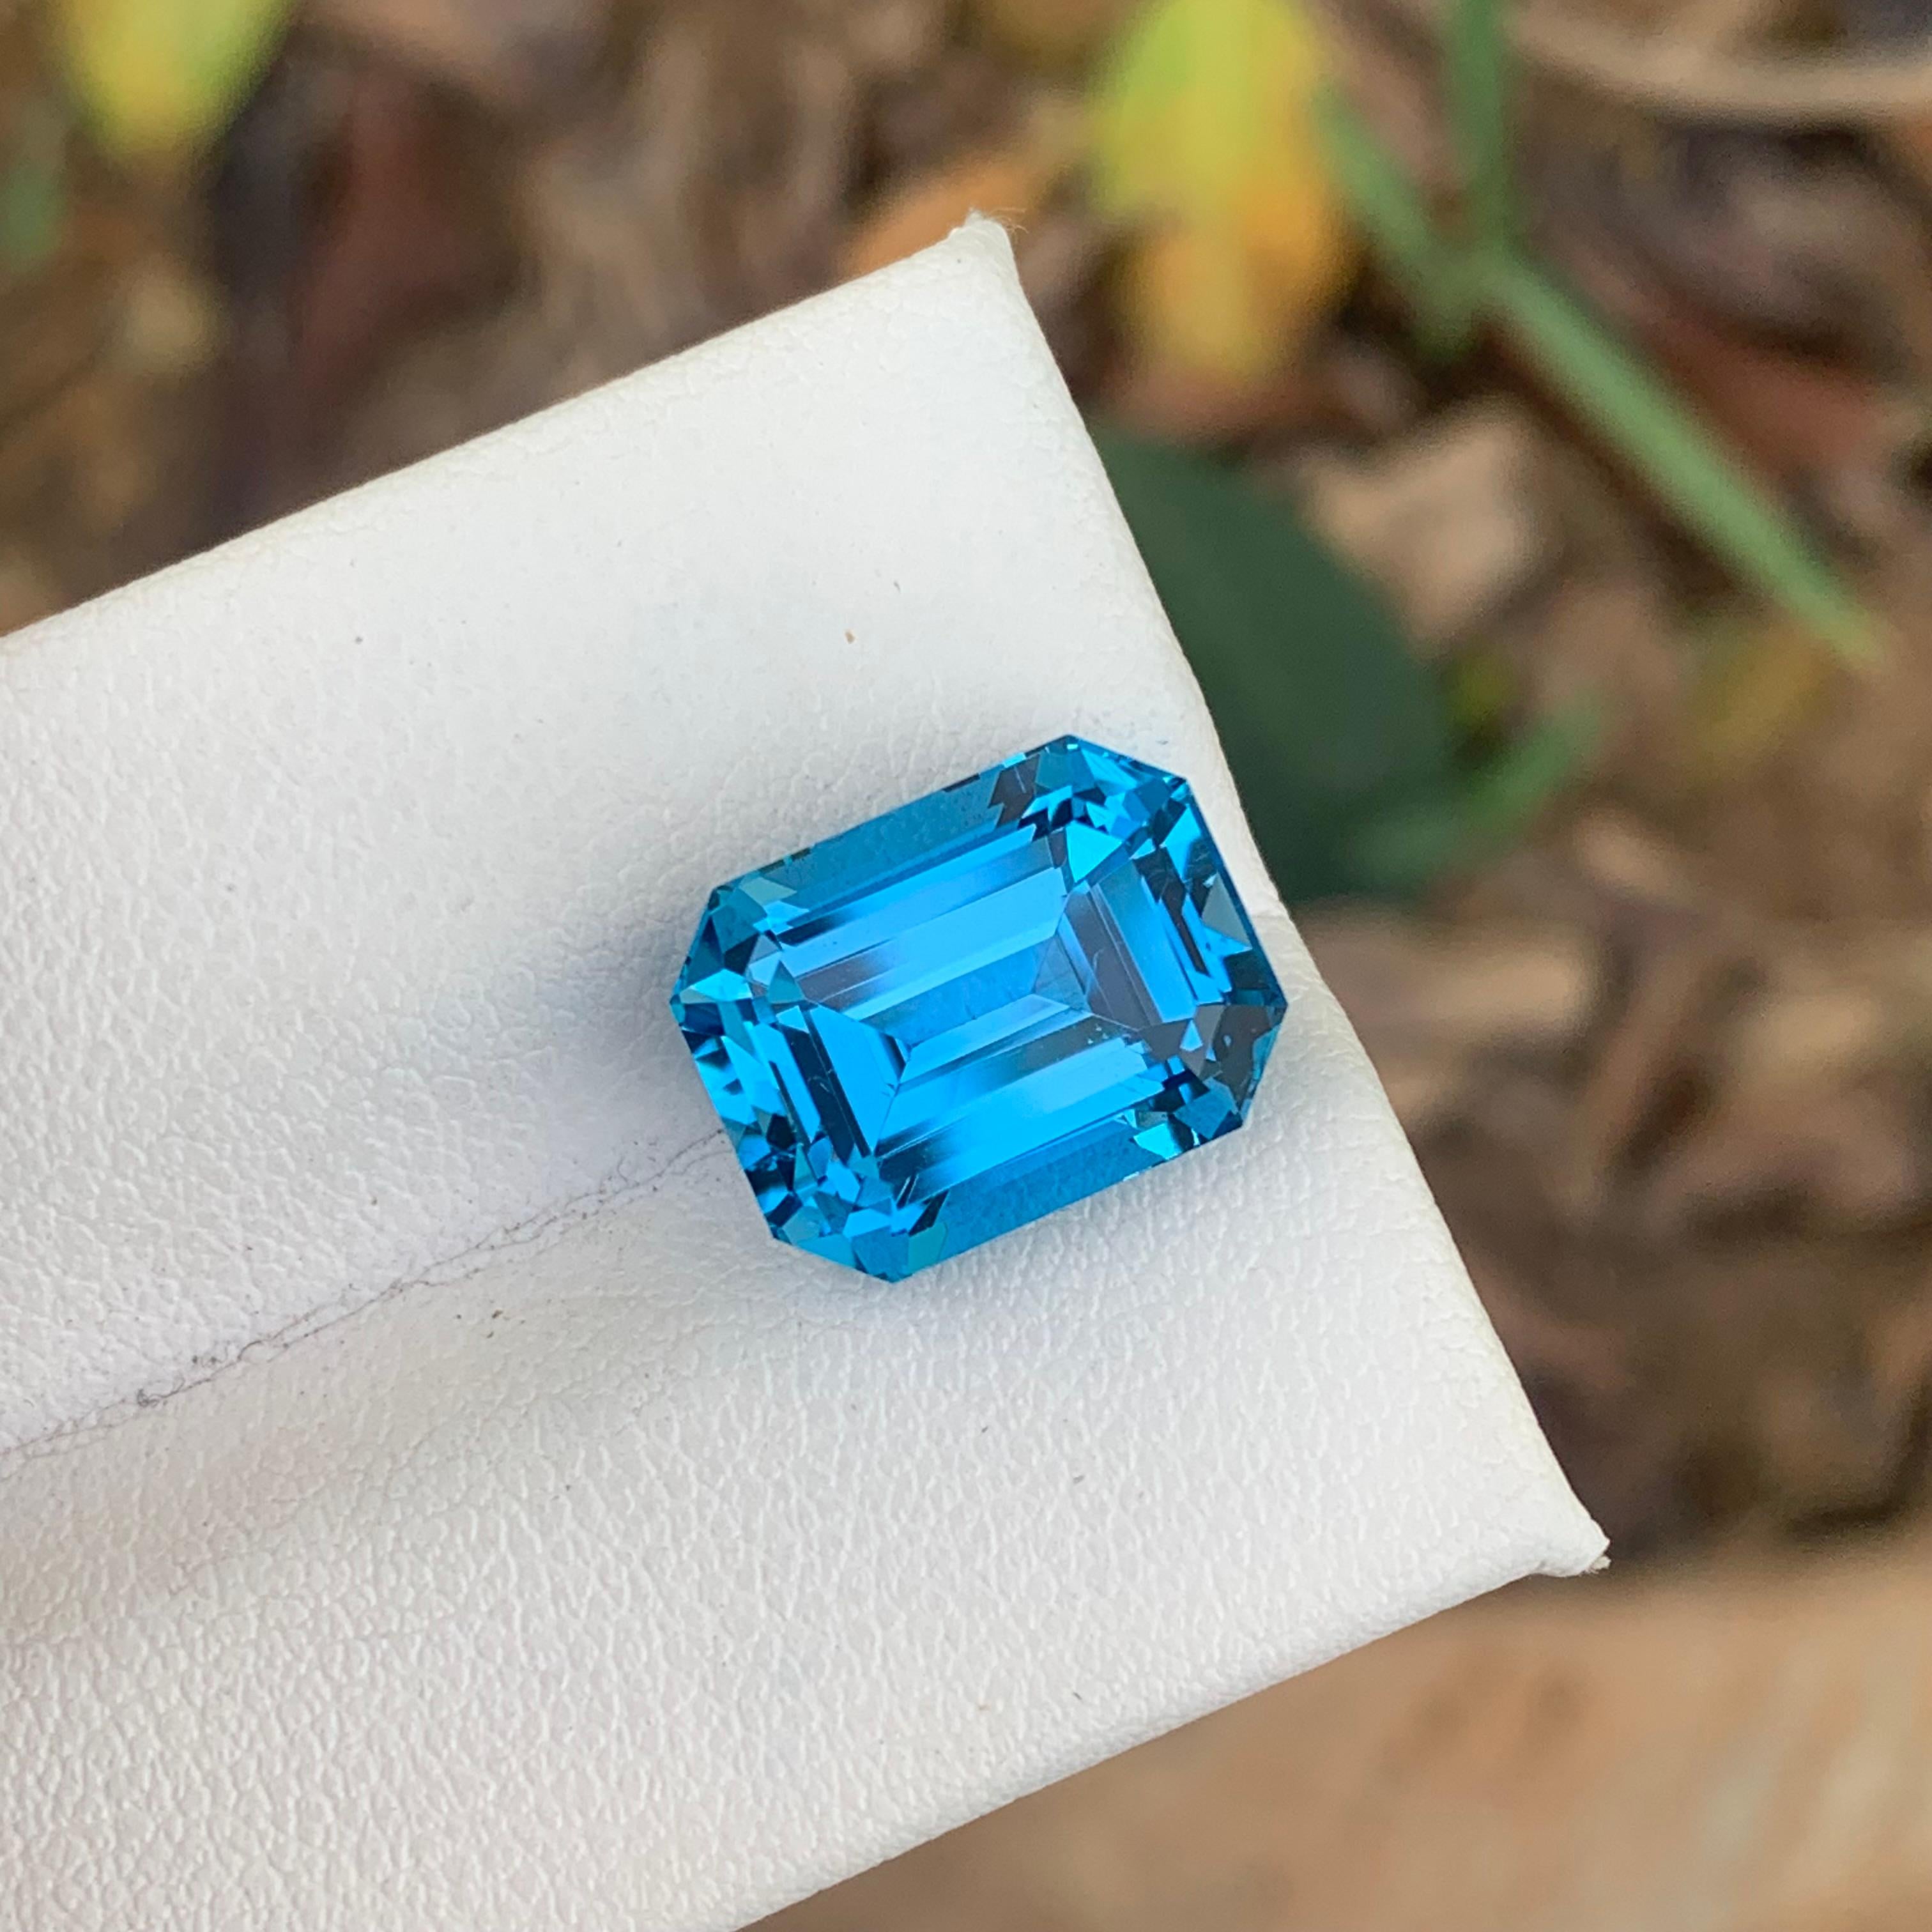 Gorgeous Intense Blue Loose Electric Blue Topaz from Brazil 9.85 Carat Ring Gem For Sale 2